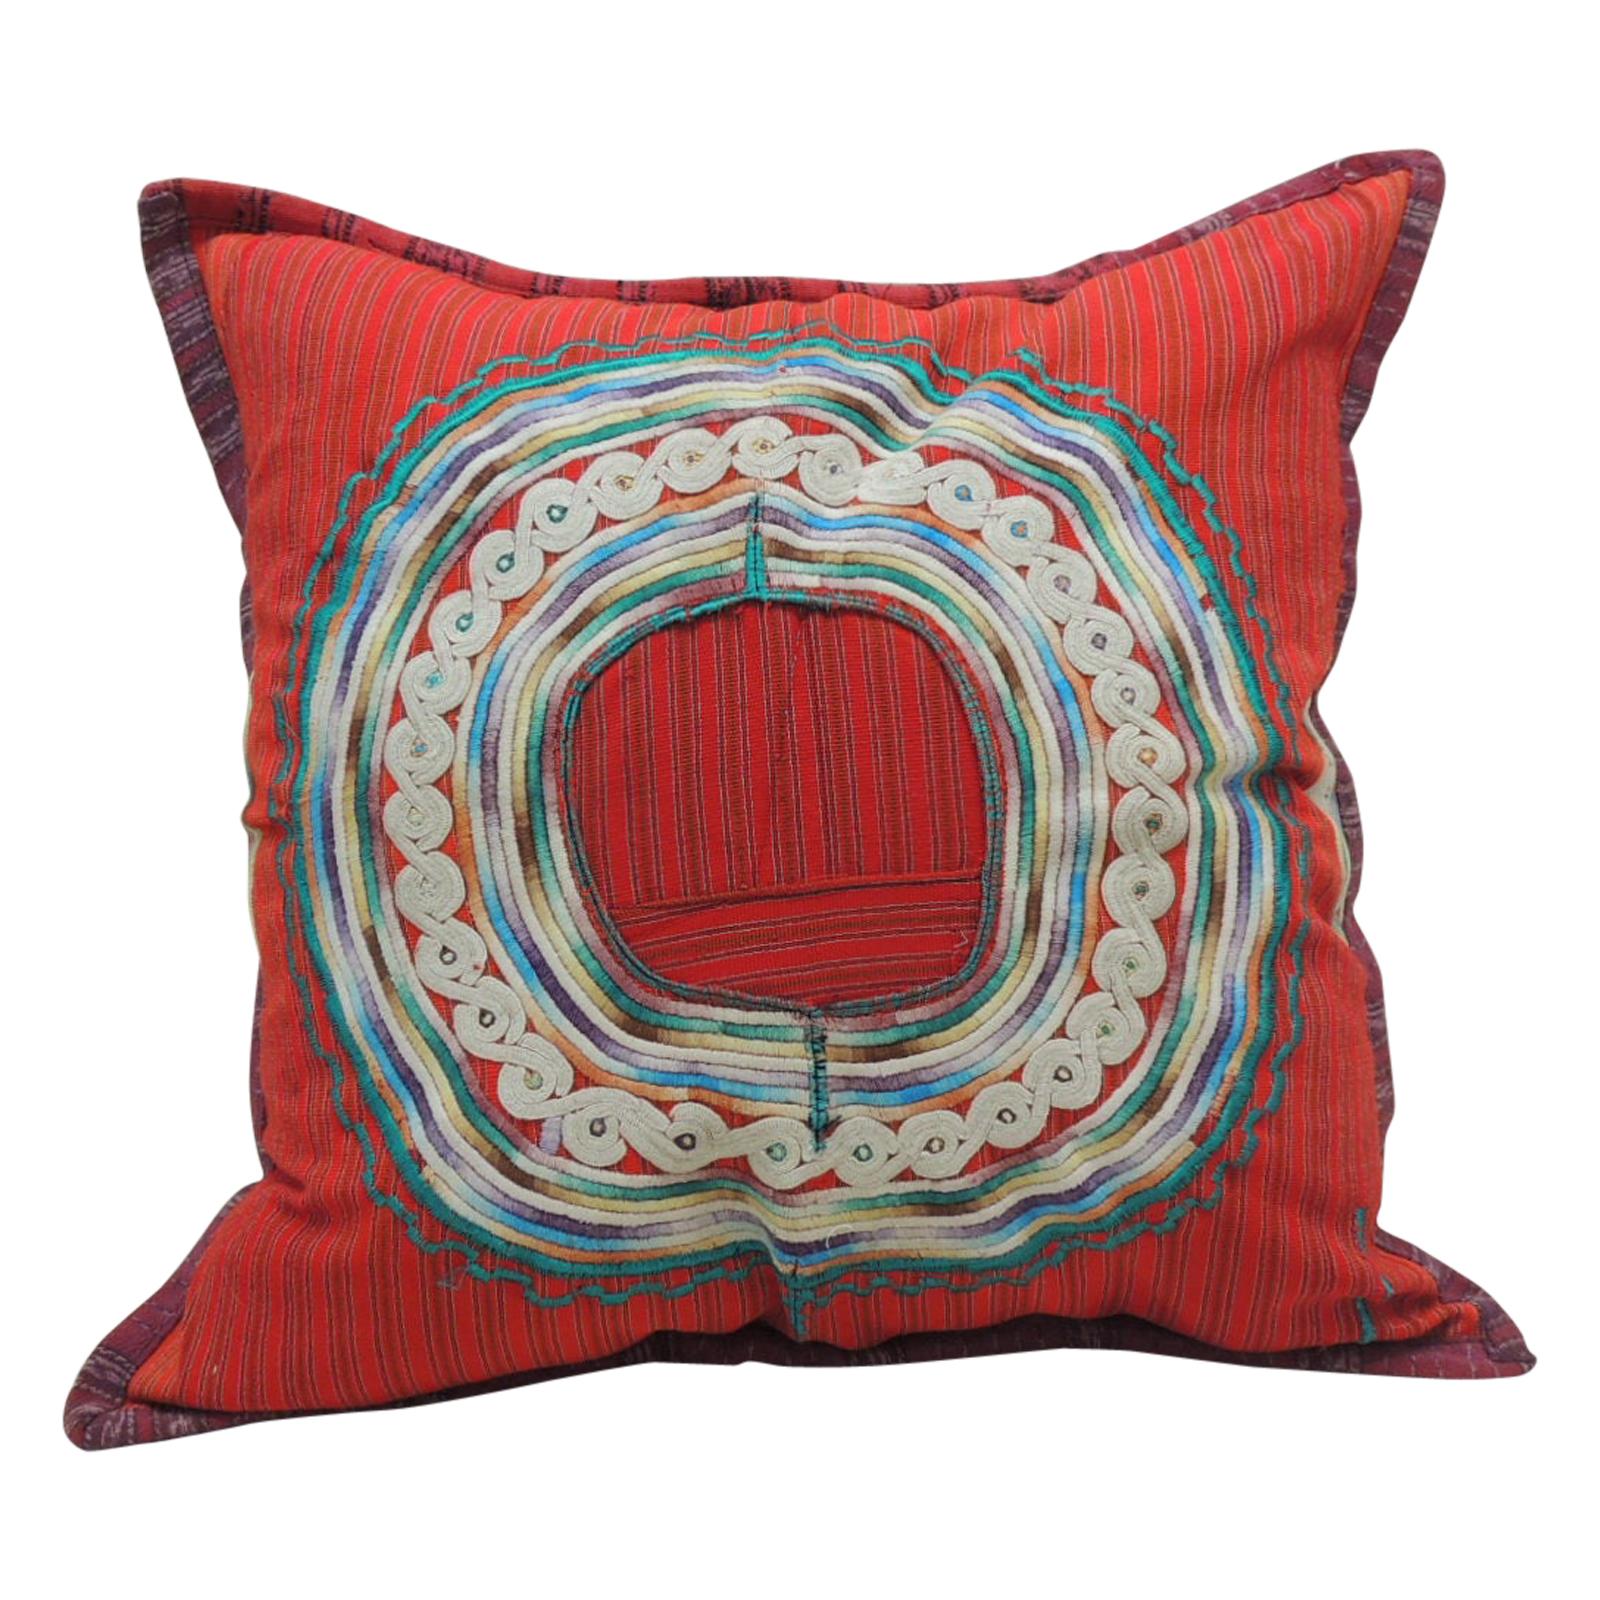 Large Green and Red Guatemalan Embroidered Square Decorative Pillow